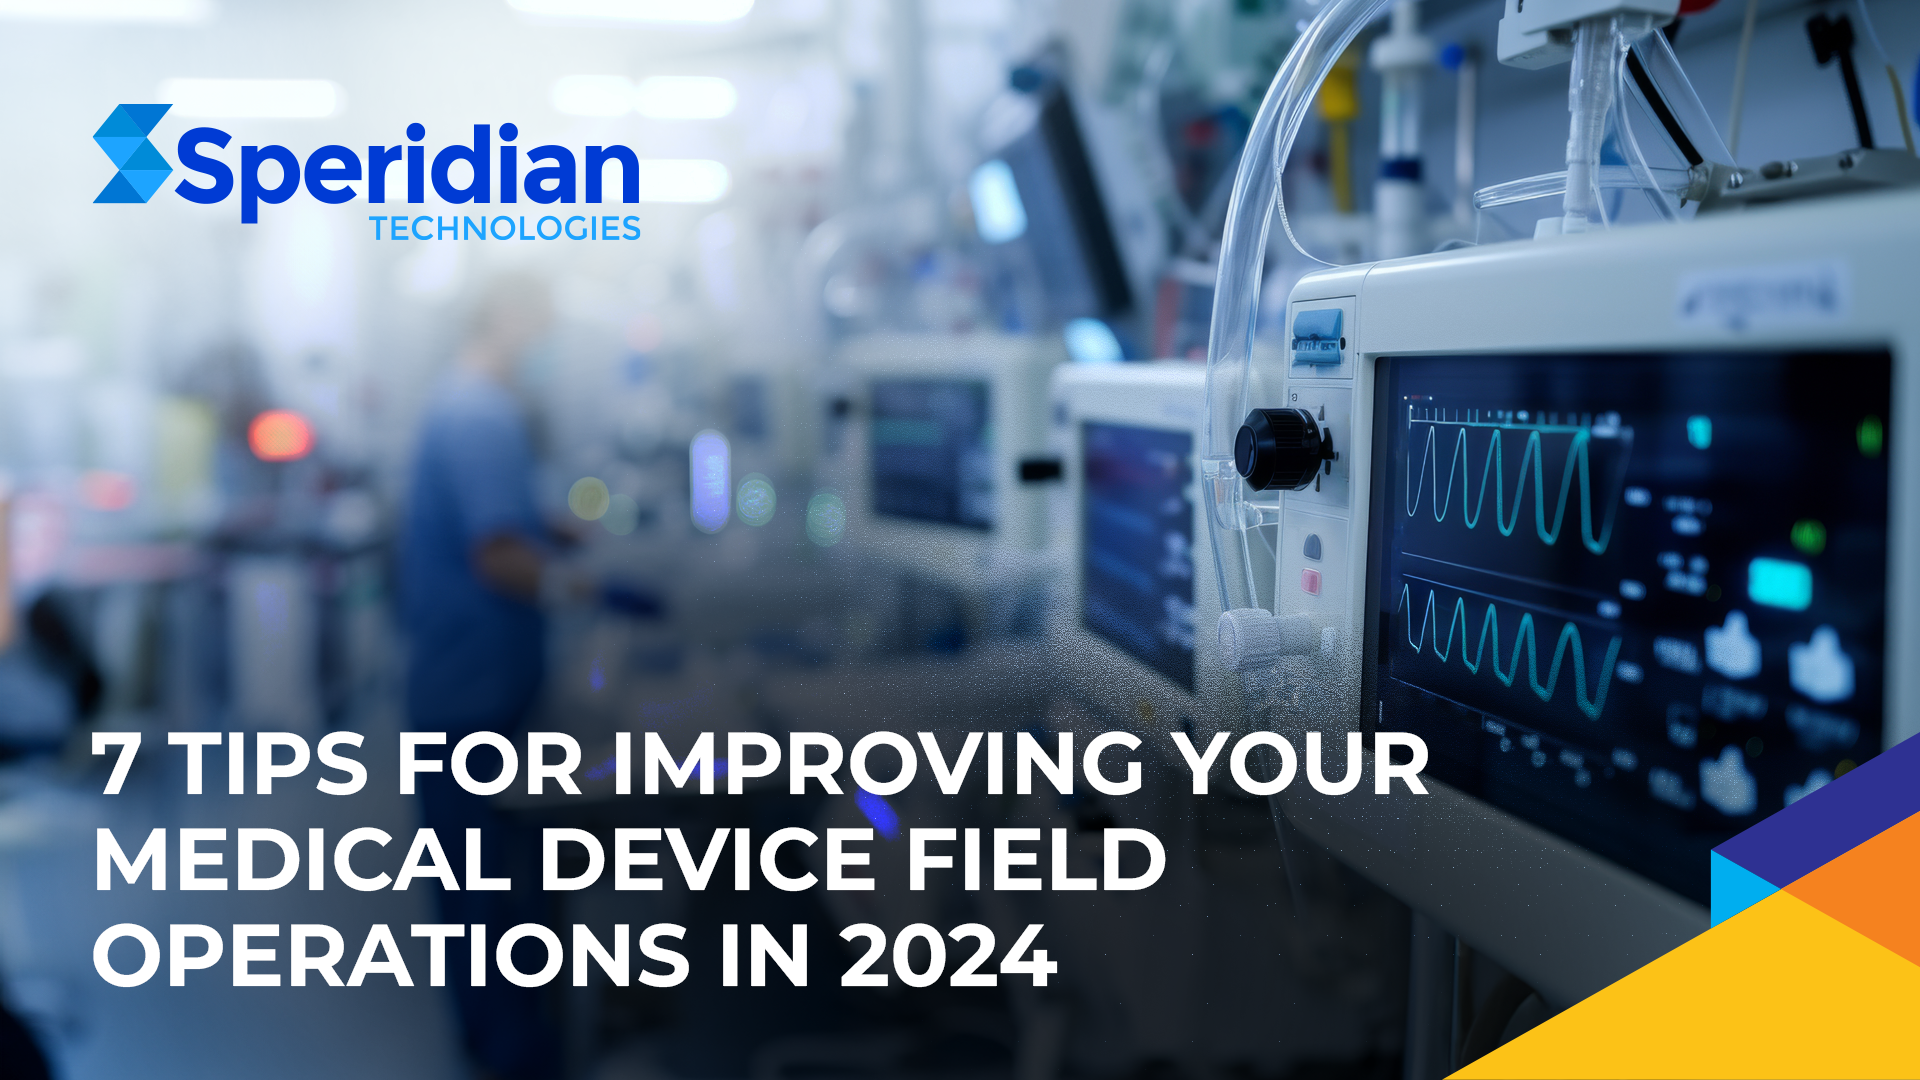 7 Tips for Improving Your Medical Device Field Operations in 2024